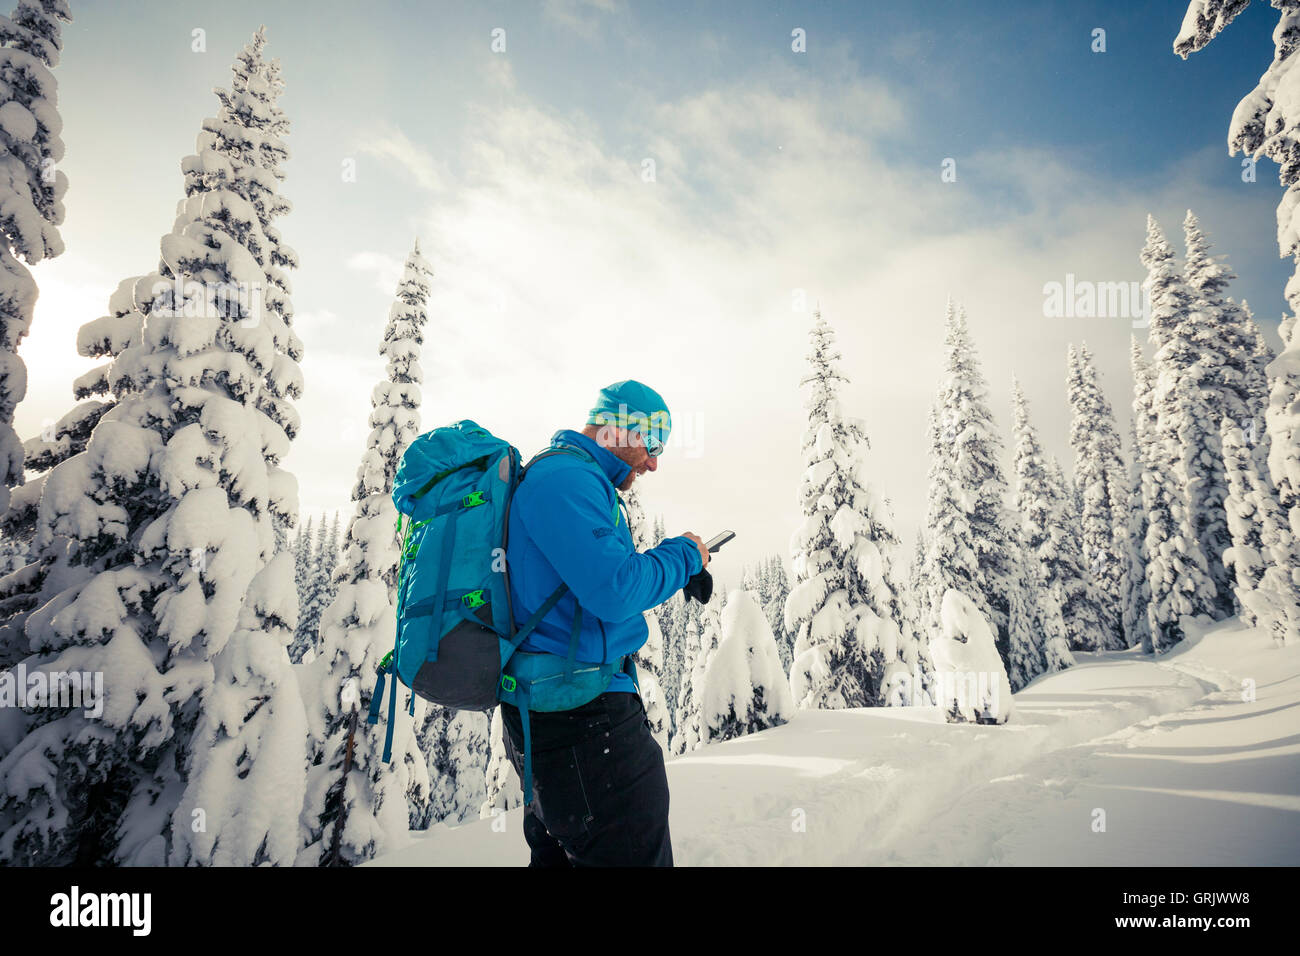 A skier stops to check his smartphone during a backcountry ski trip. Stock Photo